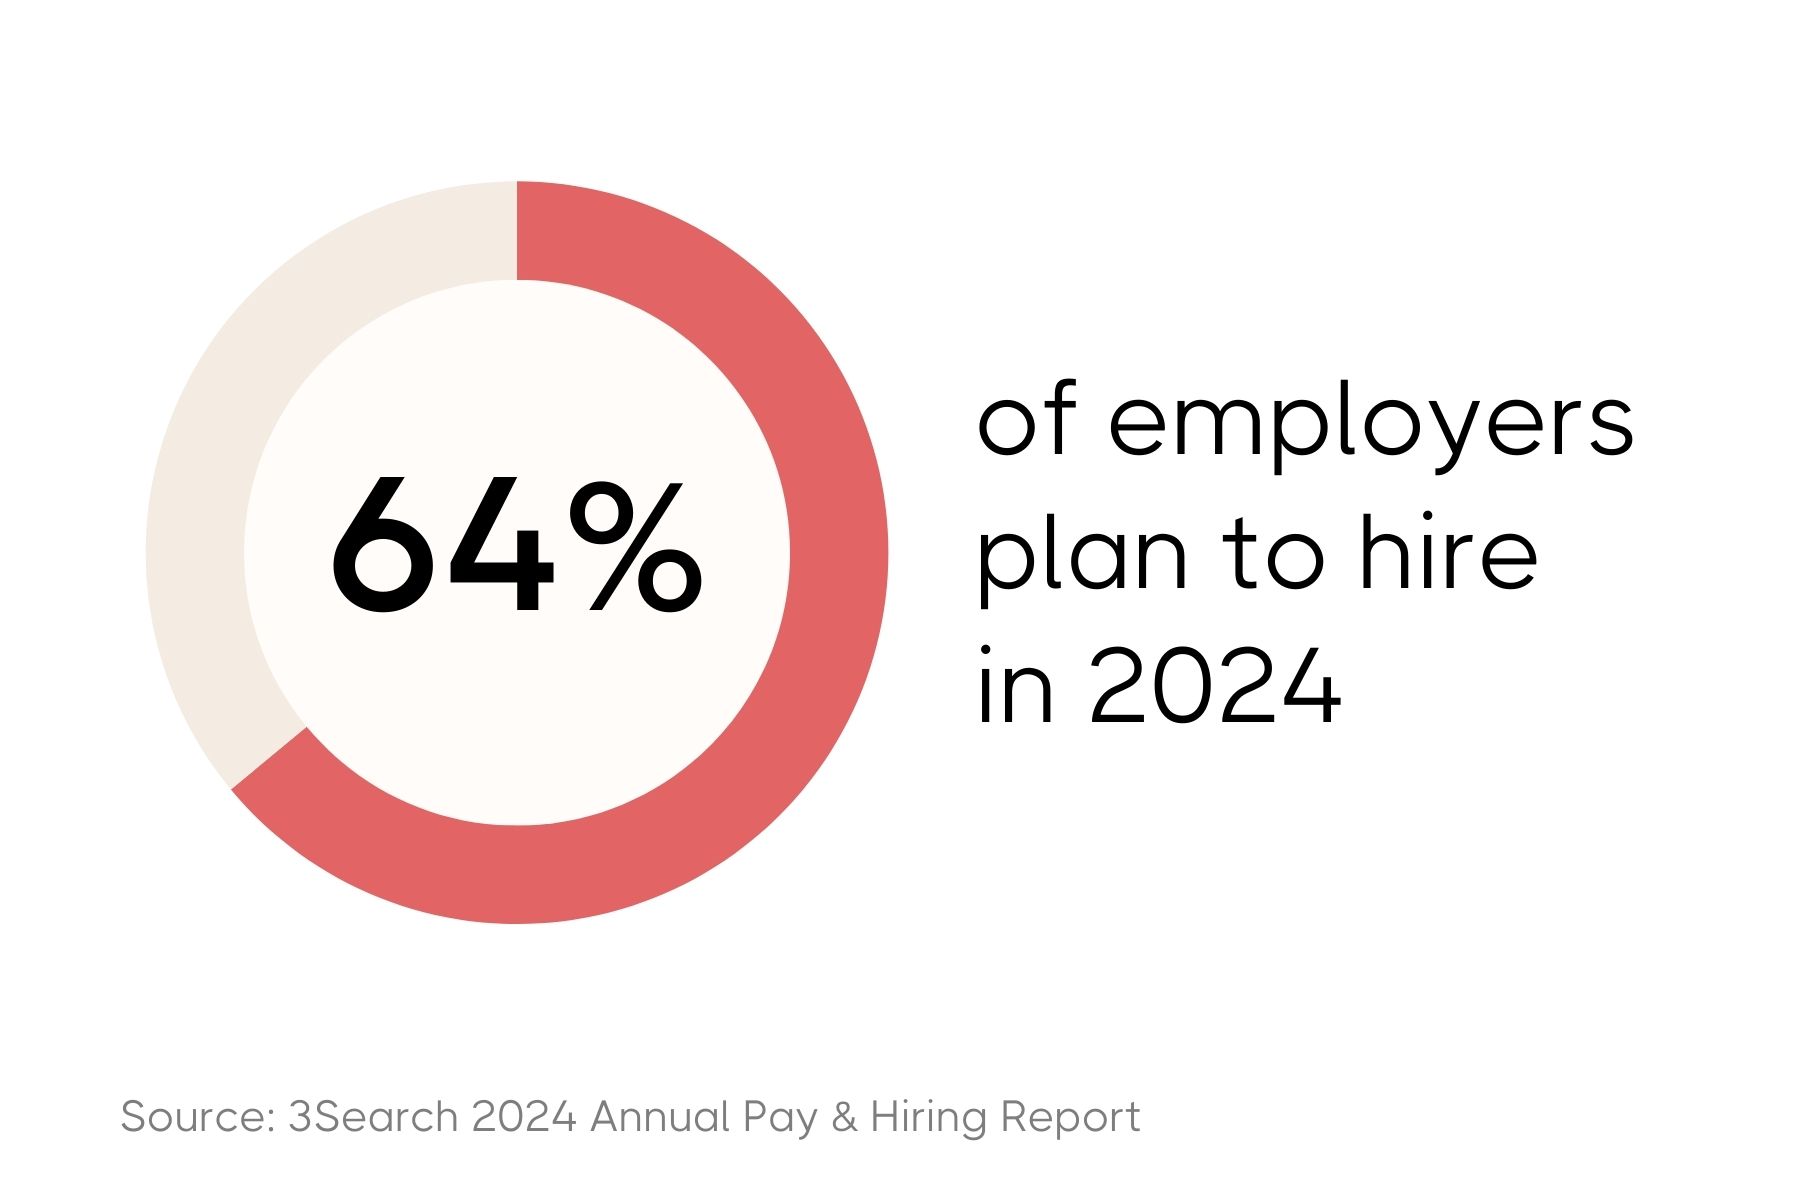 Pie chart on the left with 64% of the circle coloured in pink, the remainder is cream. In the middle is the number 64% in black text. On the right, the text reads "employers plan to hire in 2024" in black text. The grey text below reads: "Source: 3Search 2024 Annual Pay & hiring Report"